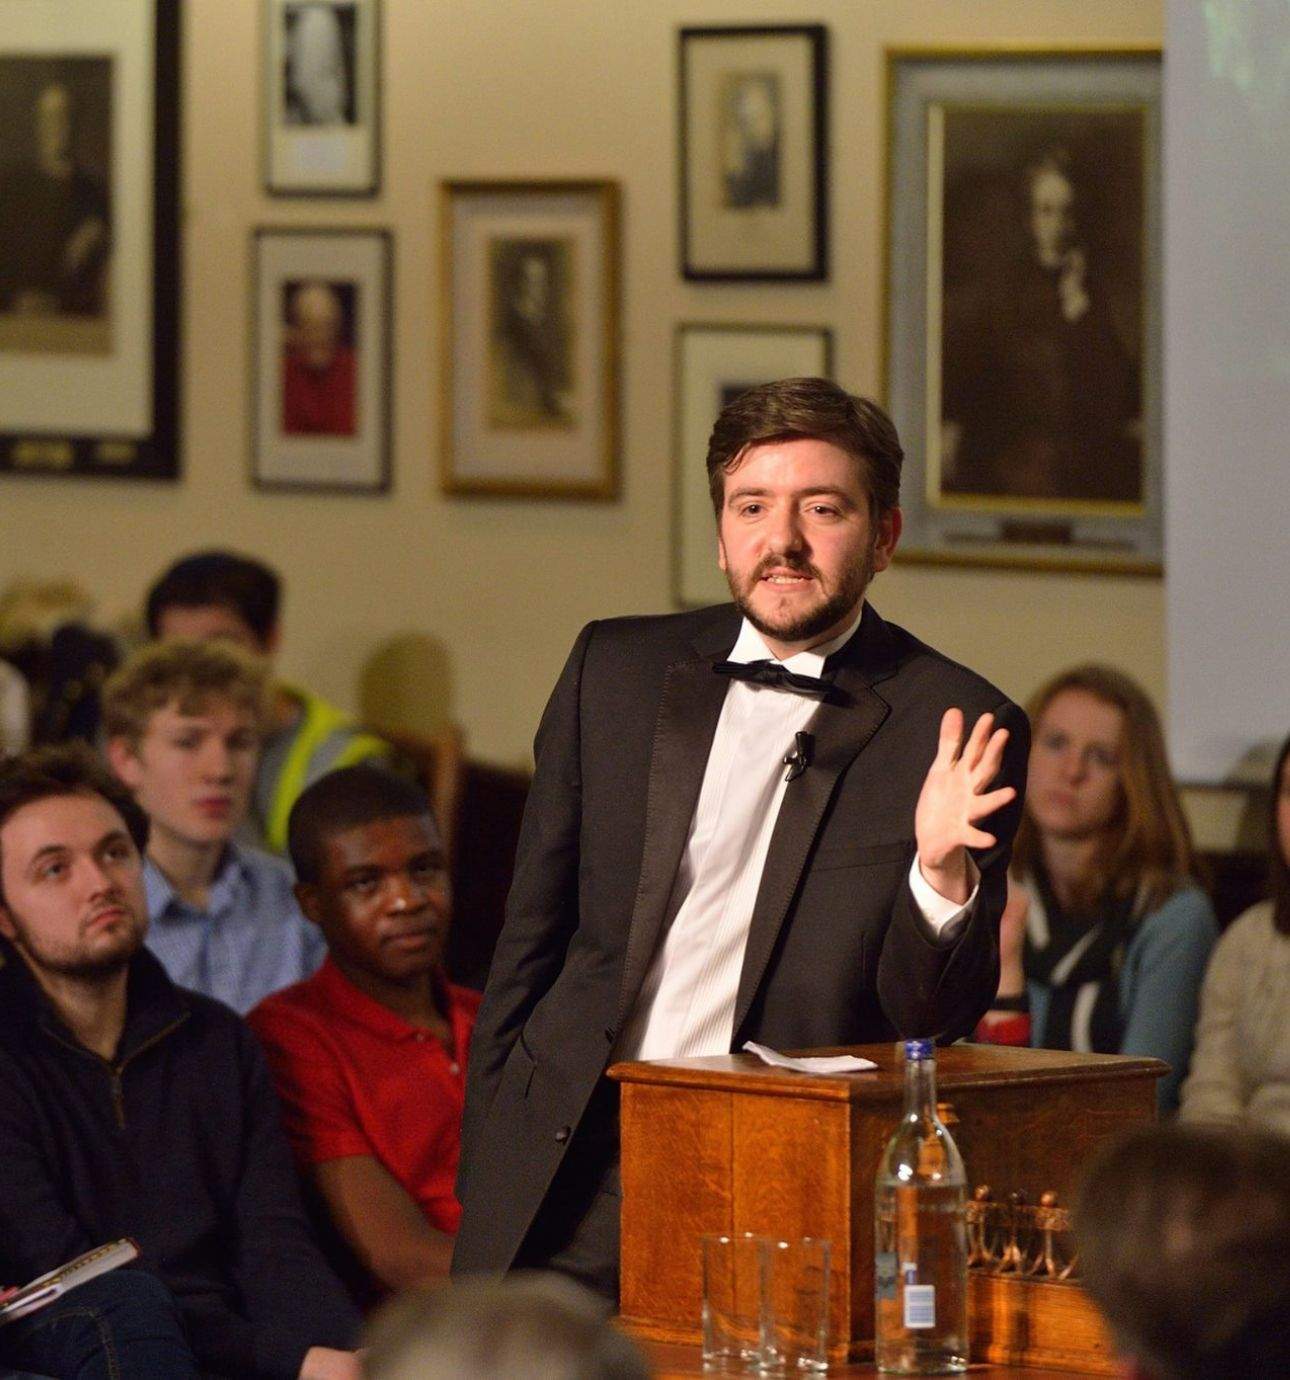 Speaker at the Cambridge Union addressing the house